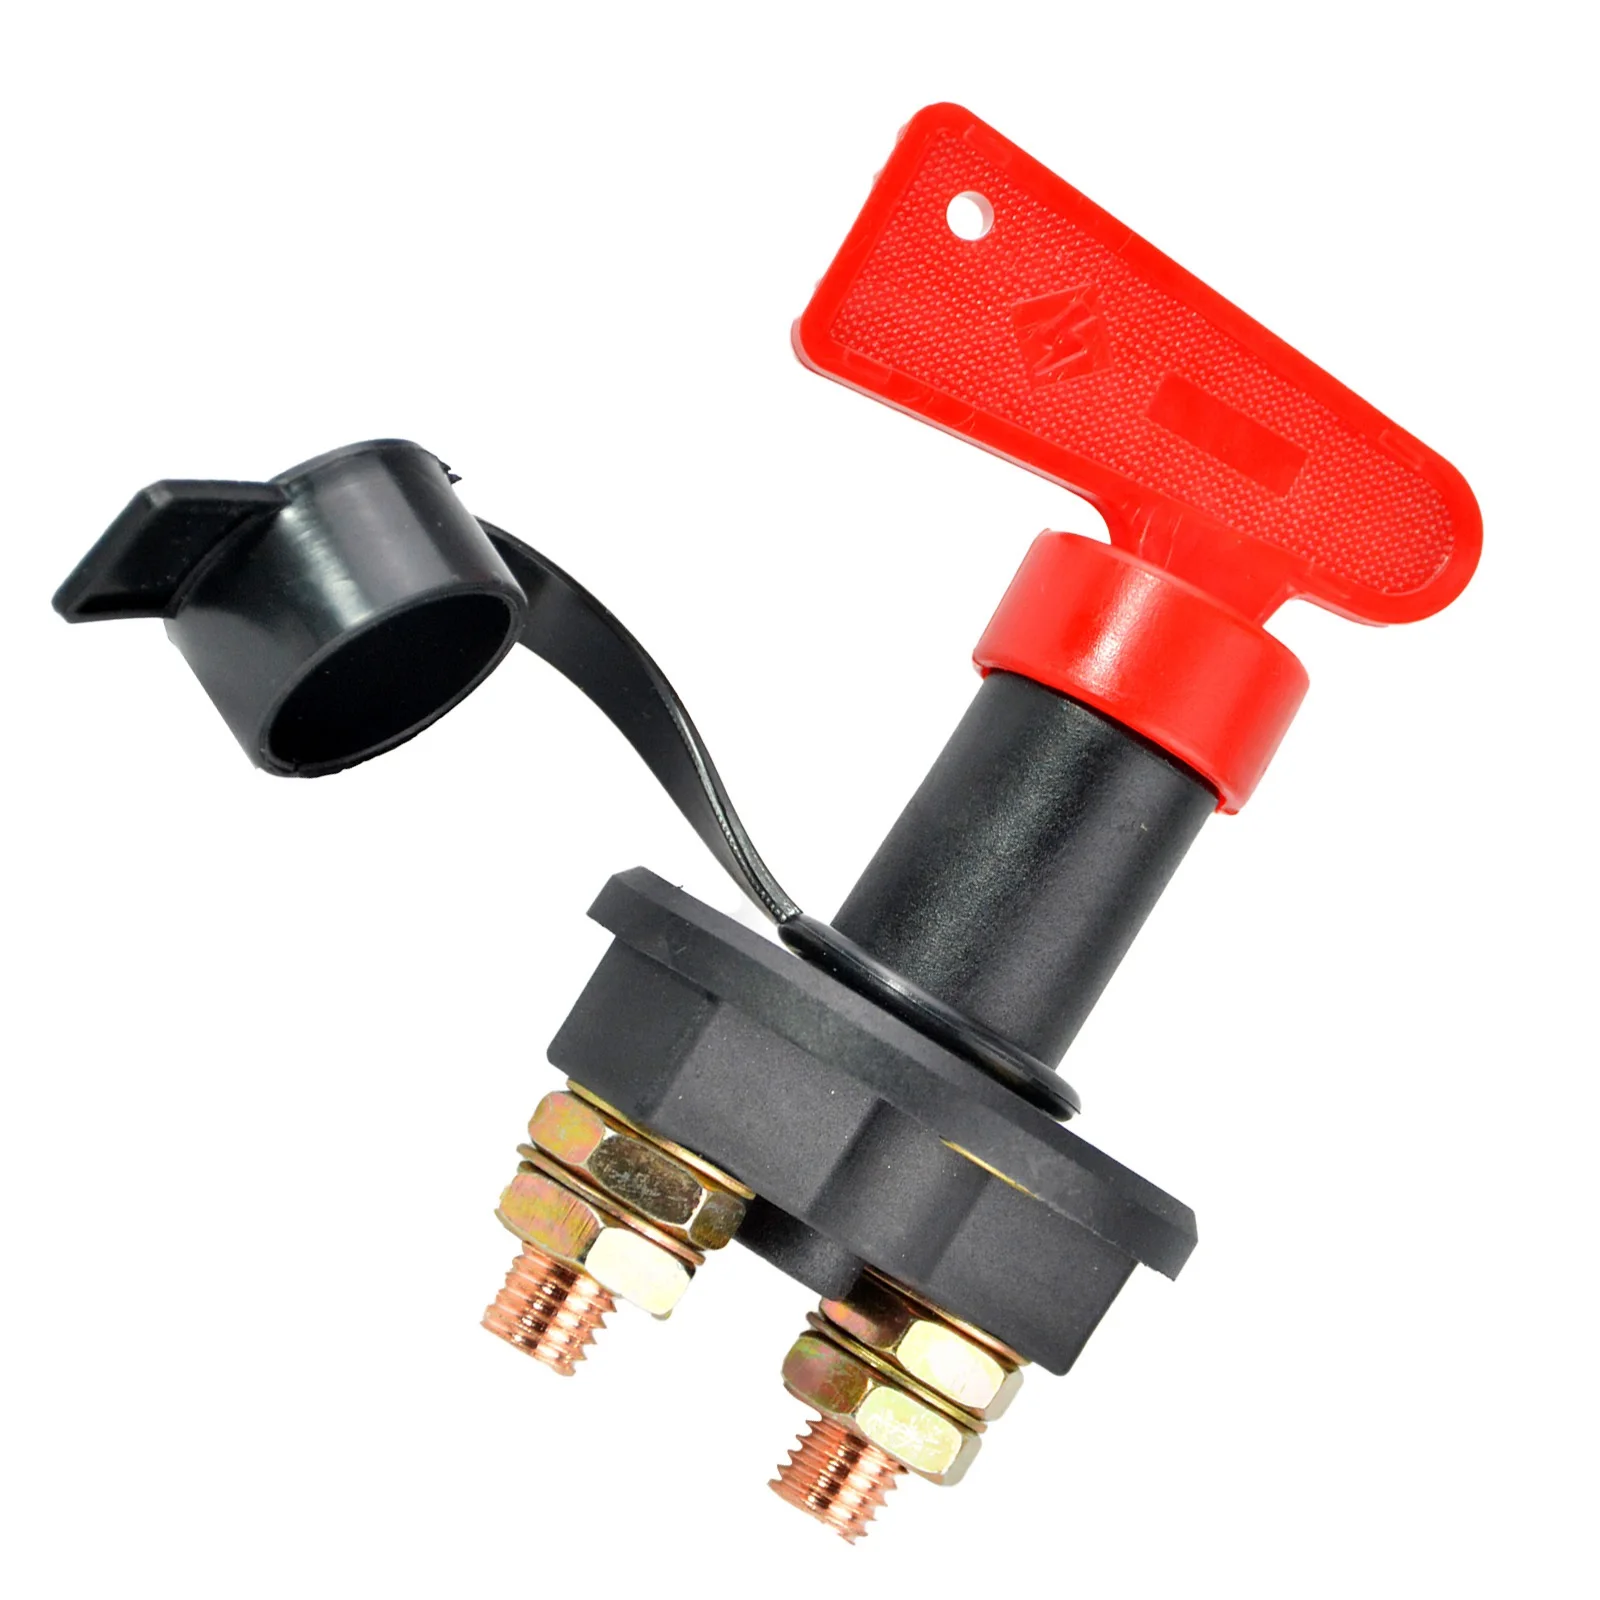 12V 24V Red Cut Off Battery Main Kill Switch Vehicle Car Modify Isolator Disconnector Truck Boat Auto Car Power Switch